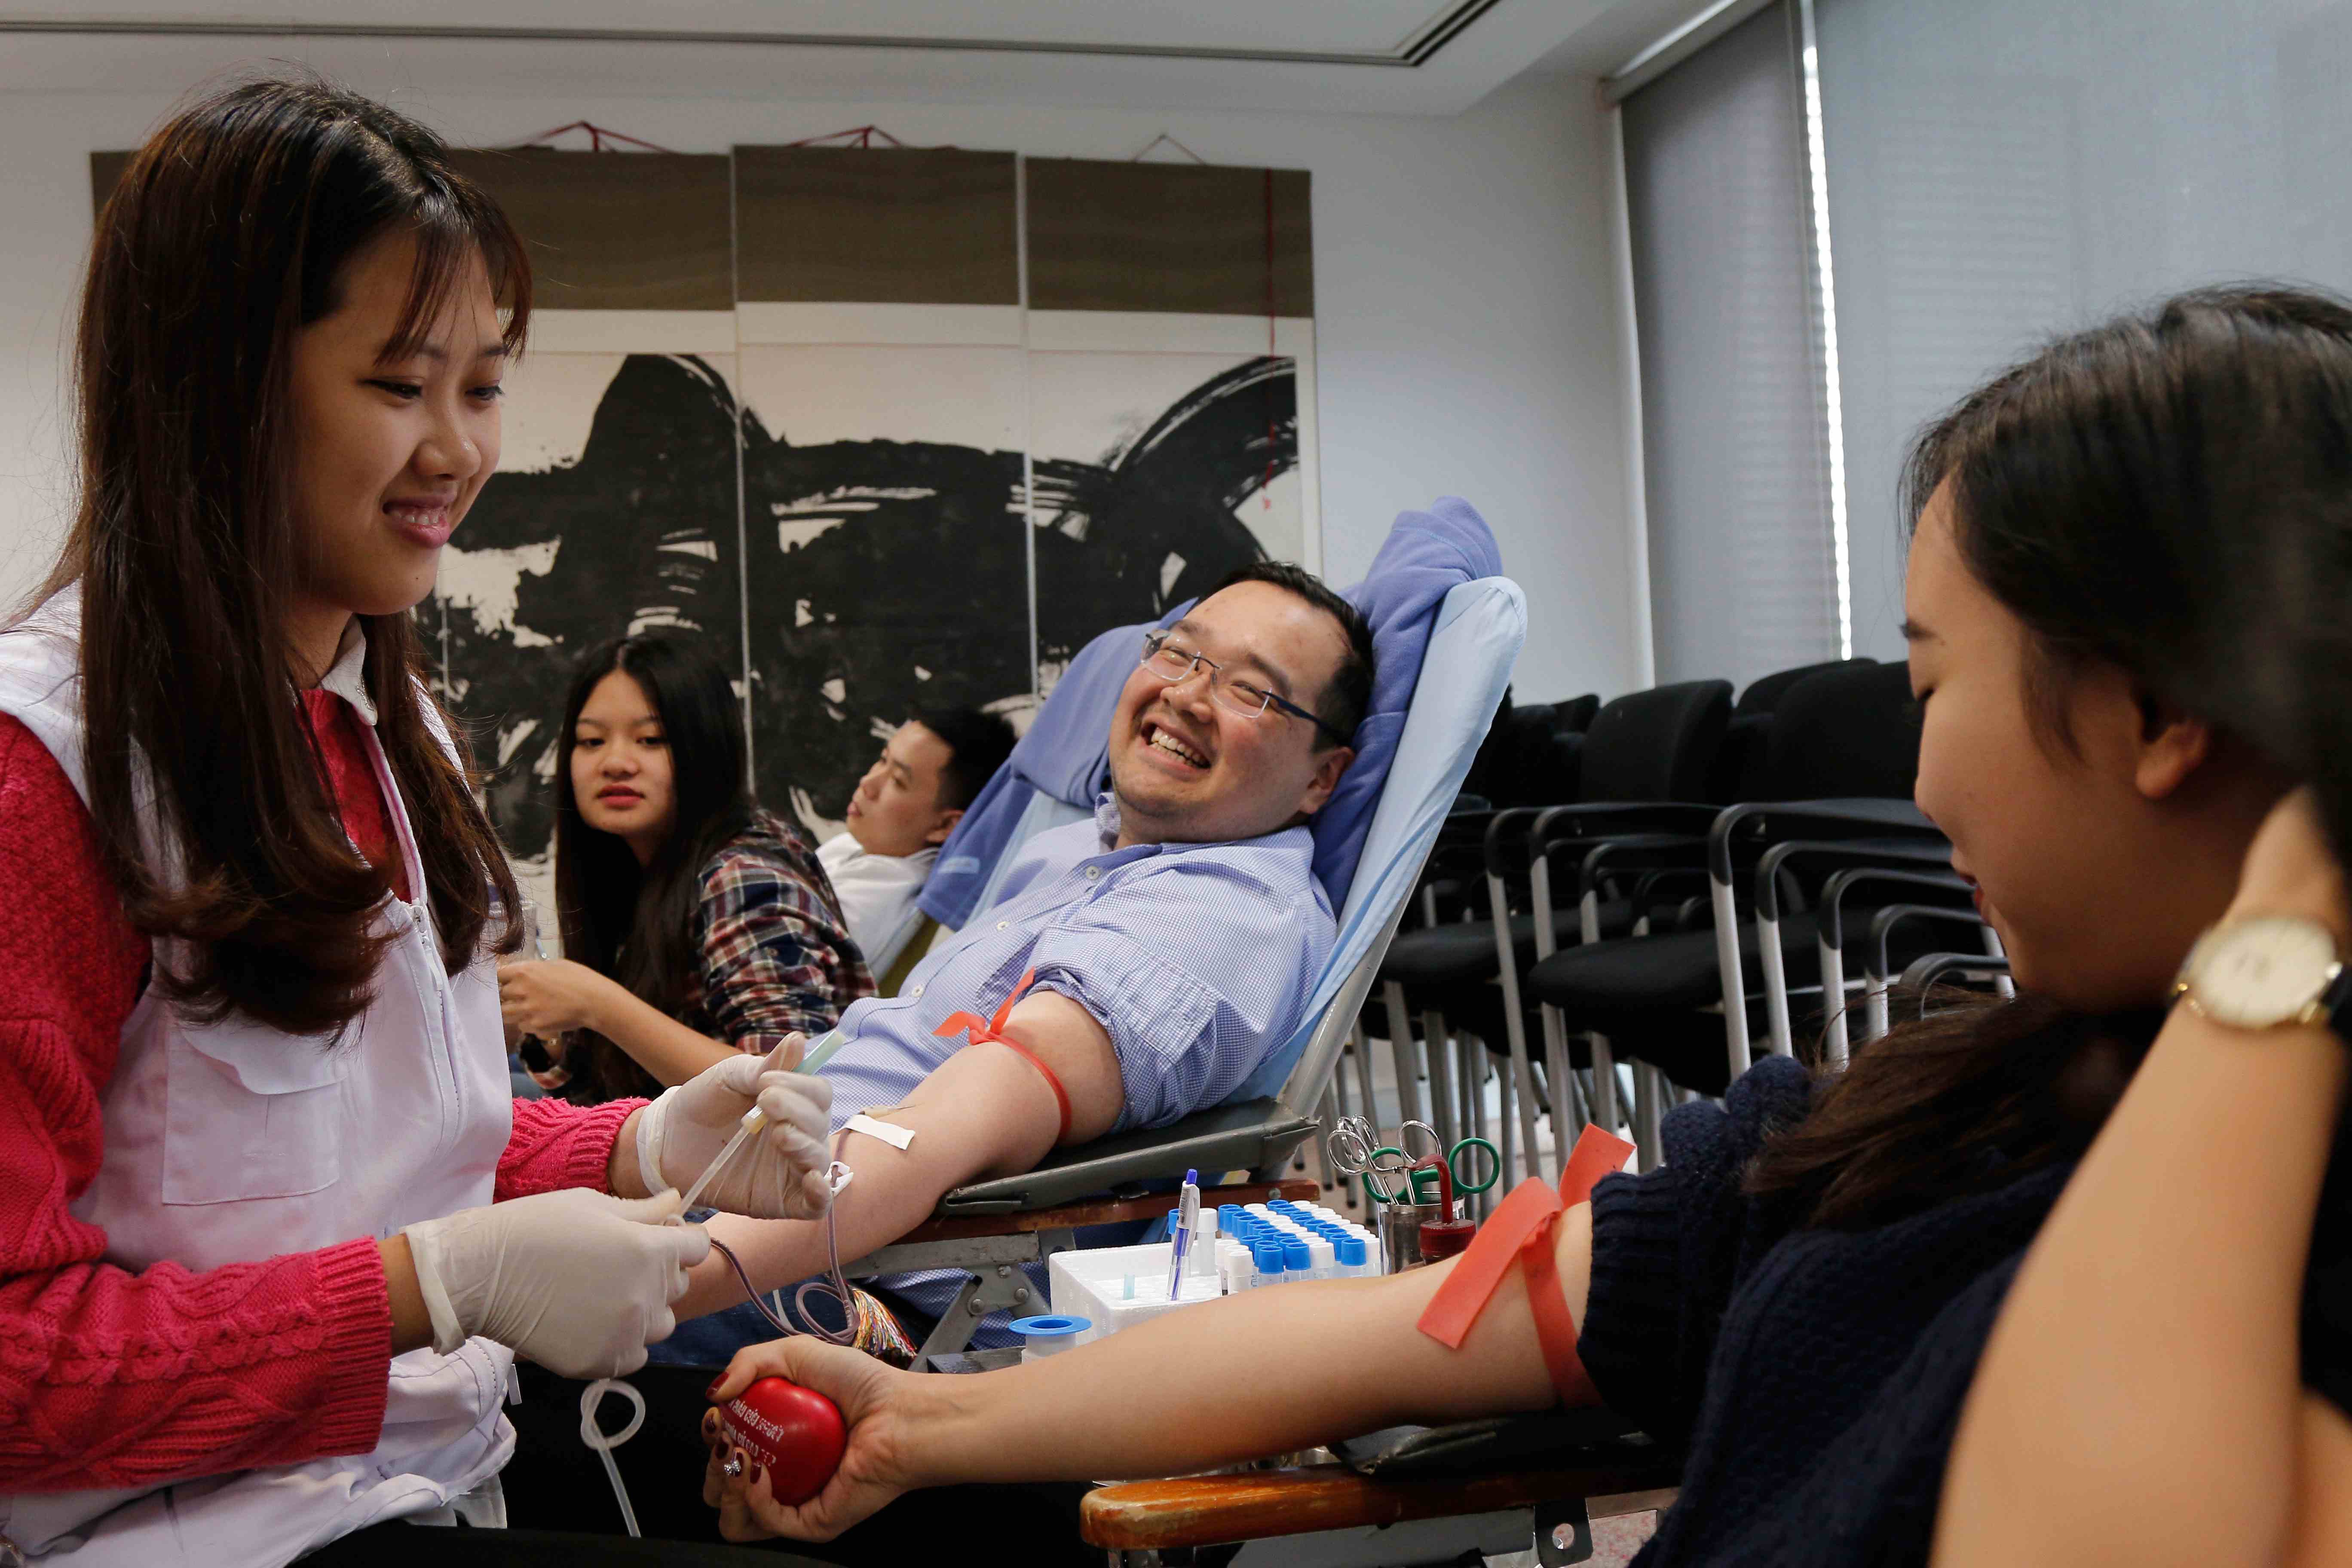 Led by the Environment Club, Hanoi students organised a Blood Donation Day. The event attracted many staff and students who donated blood to patients in need.